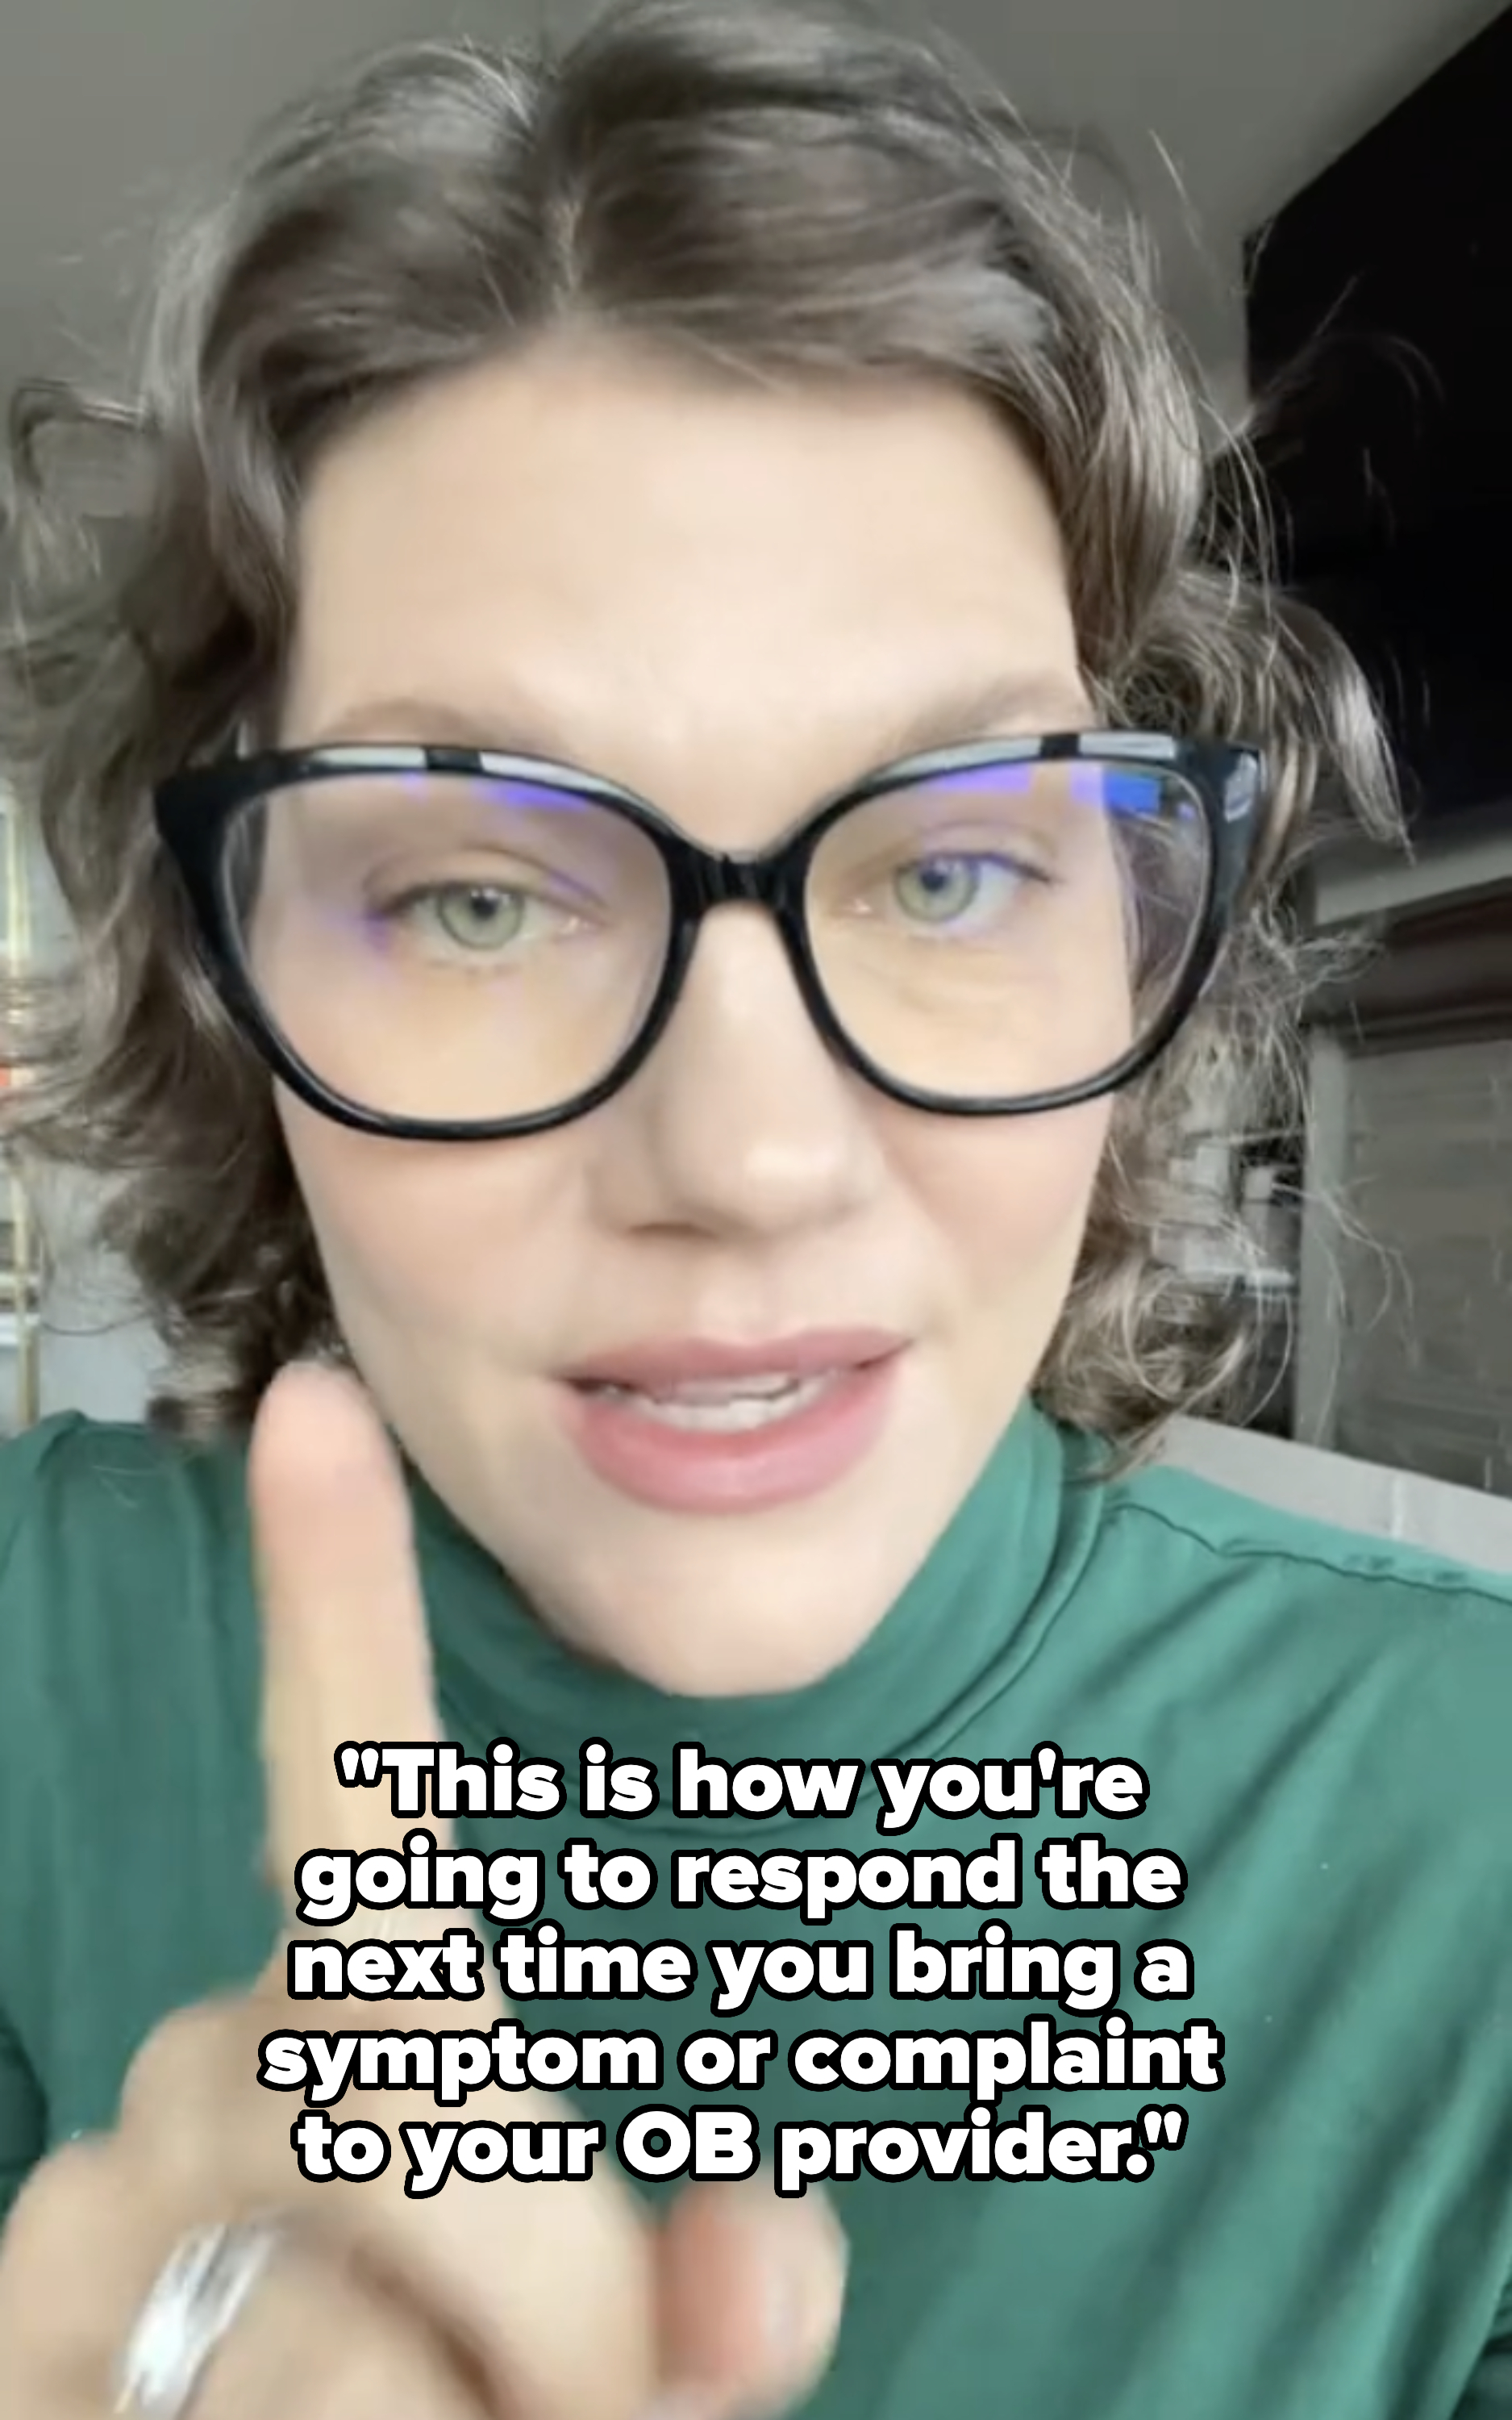 Woman with glasses raising a finger, wearing a turtleneck top with a ring on the finger, with caption about how to respond to &quot;your OB provider&quot;